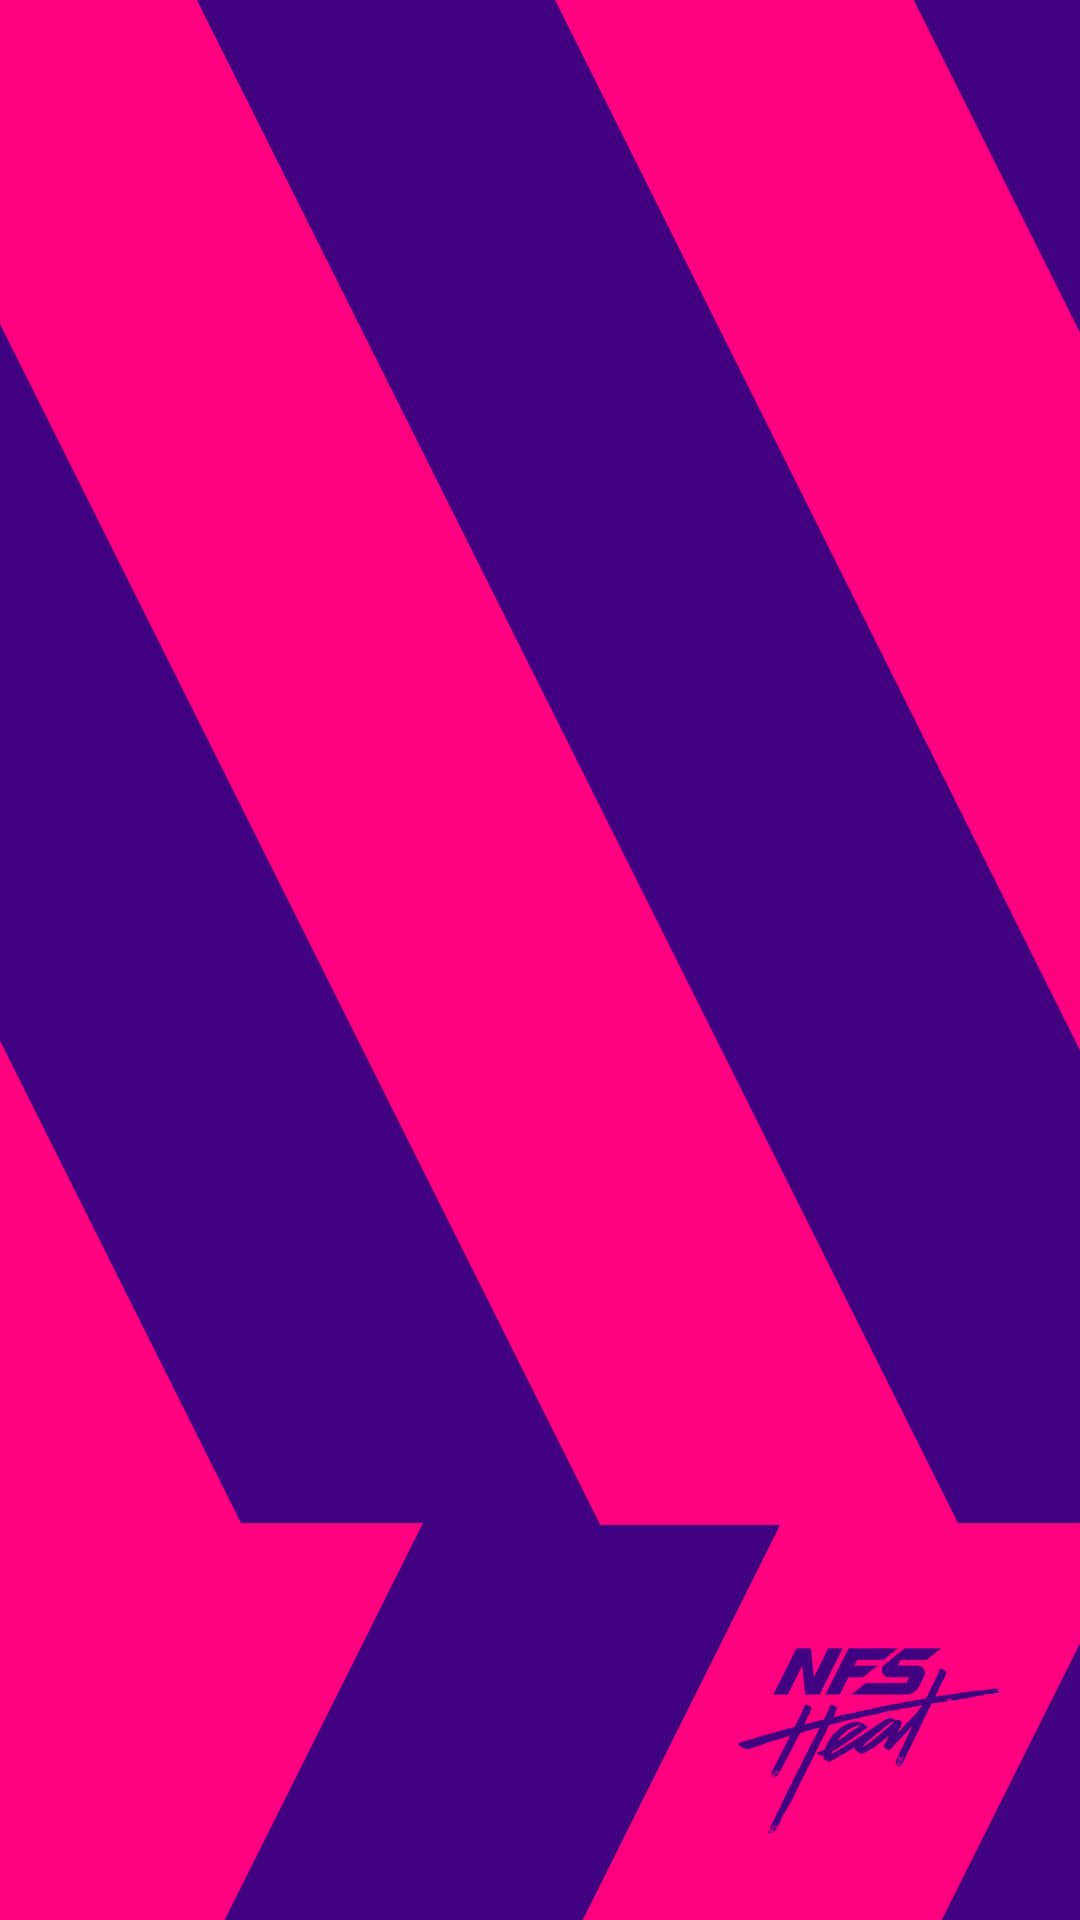 A Purple And Pink Striped Background With The Words Miss First